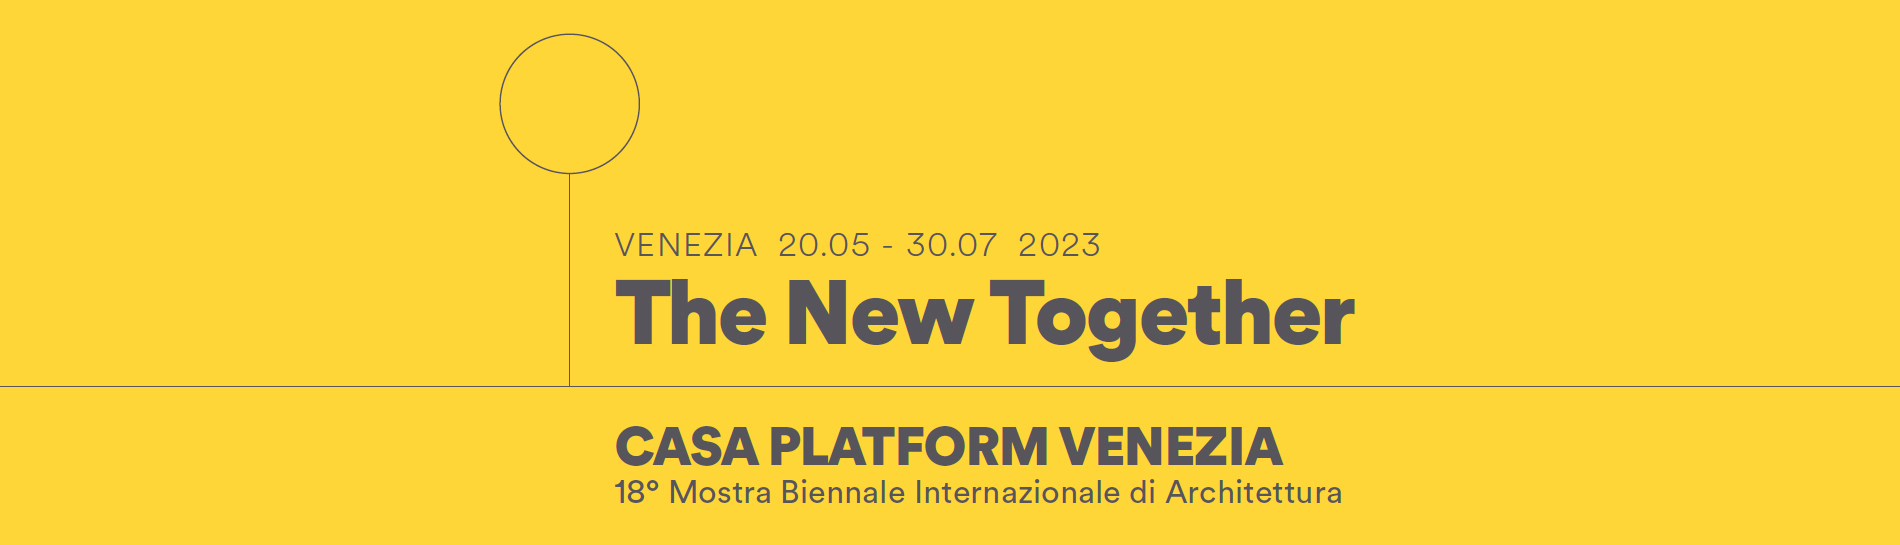 Poster of The New Together event in Venice